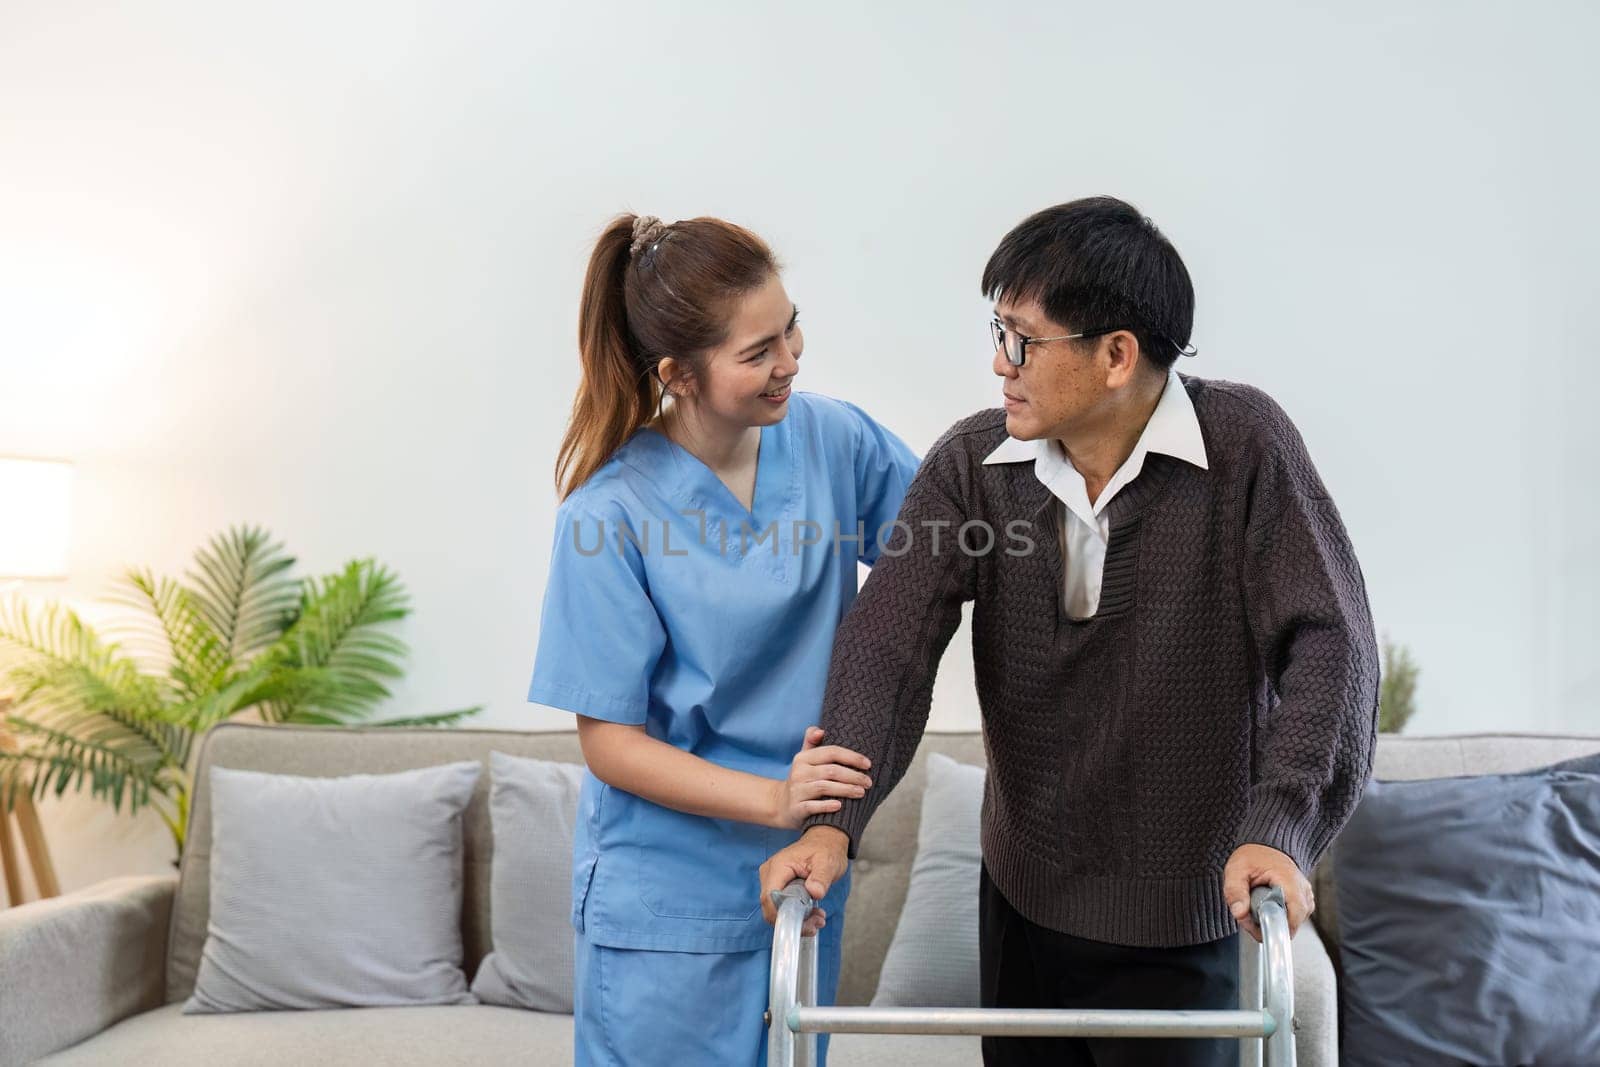 Nurse or caregiver help elderly walk by using walker at home. healthcare home visit concept by itchaznong